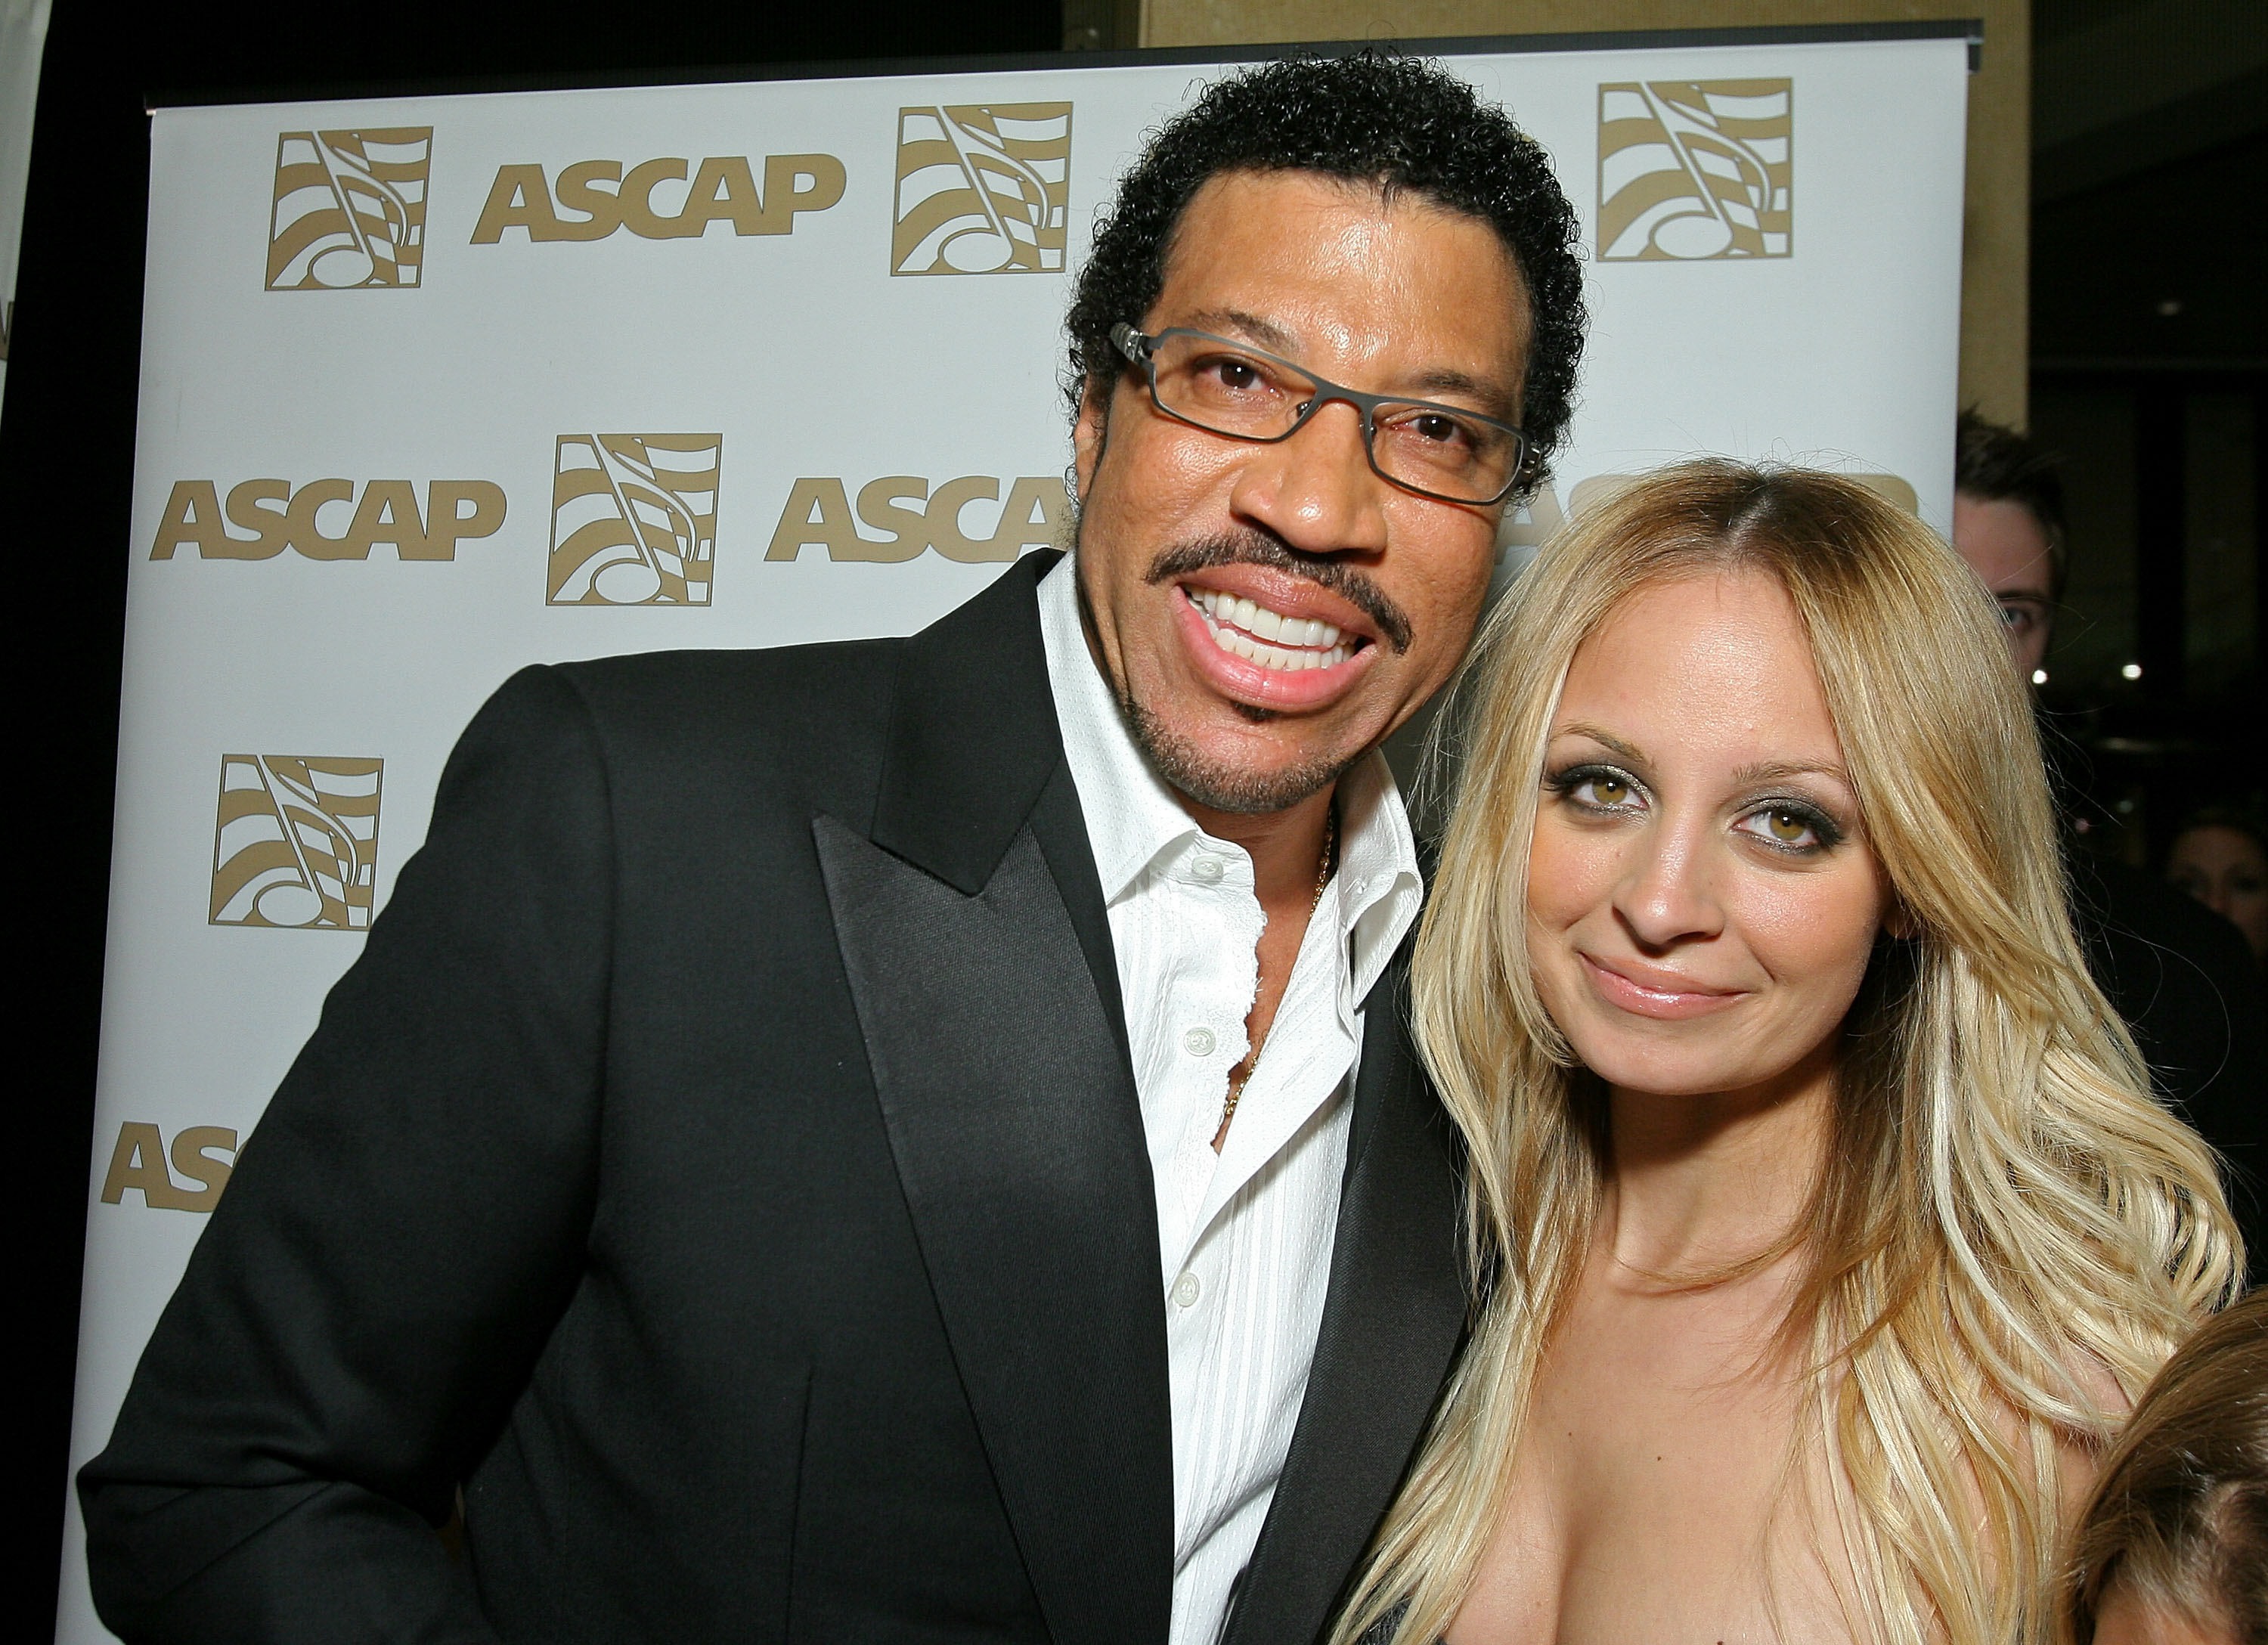 Lionel Richie and Nicole Richie at the 2008 ASCAP Pop Awards at the Kodak Theatre on April 9, 2008 in Hollywood, California. | Source: Getty Images